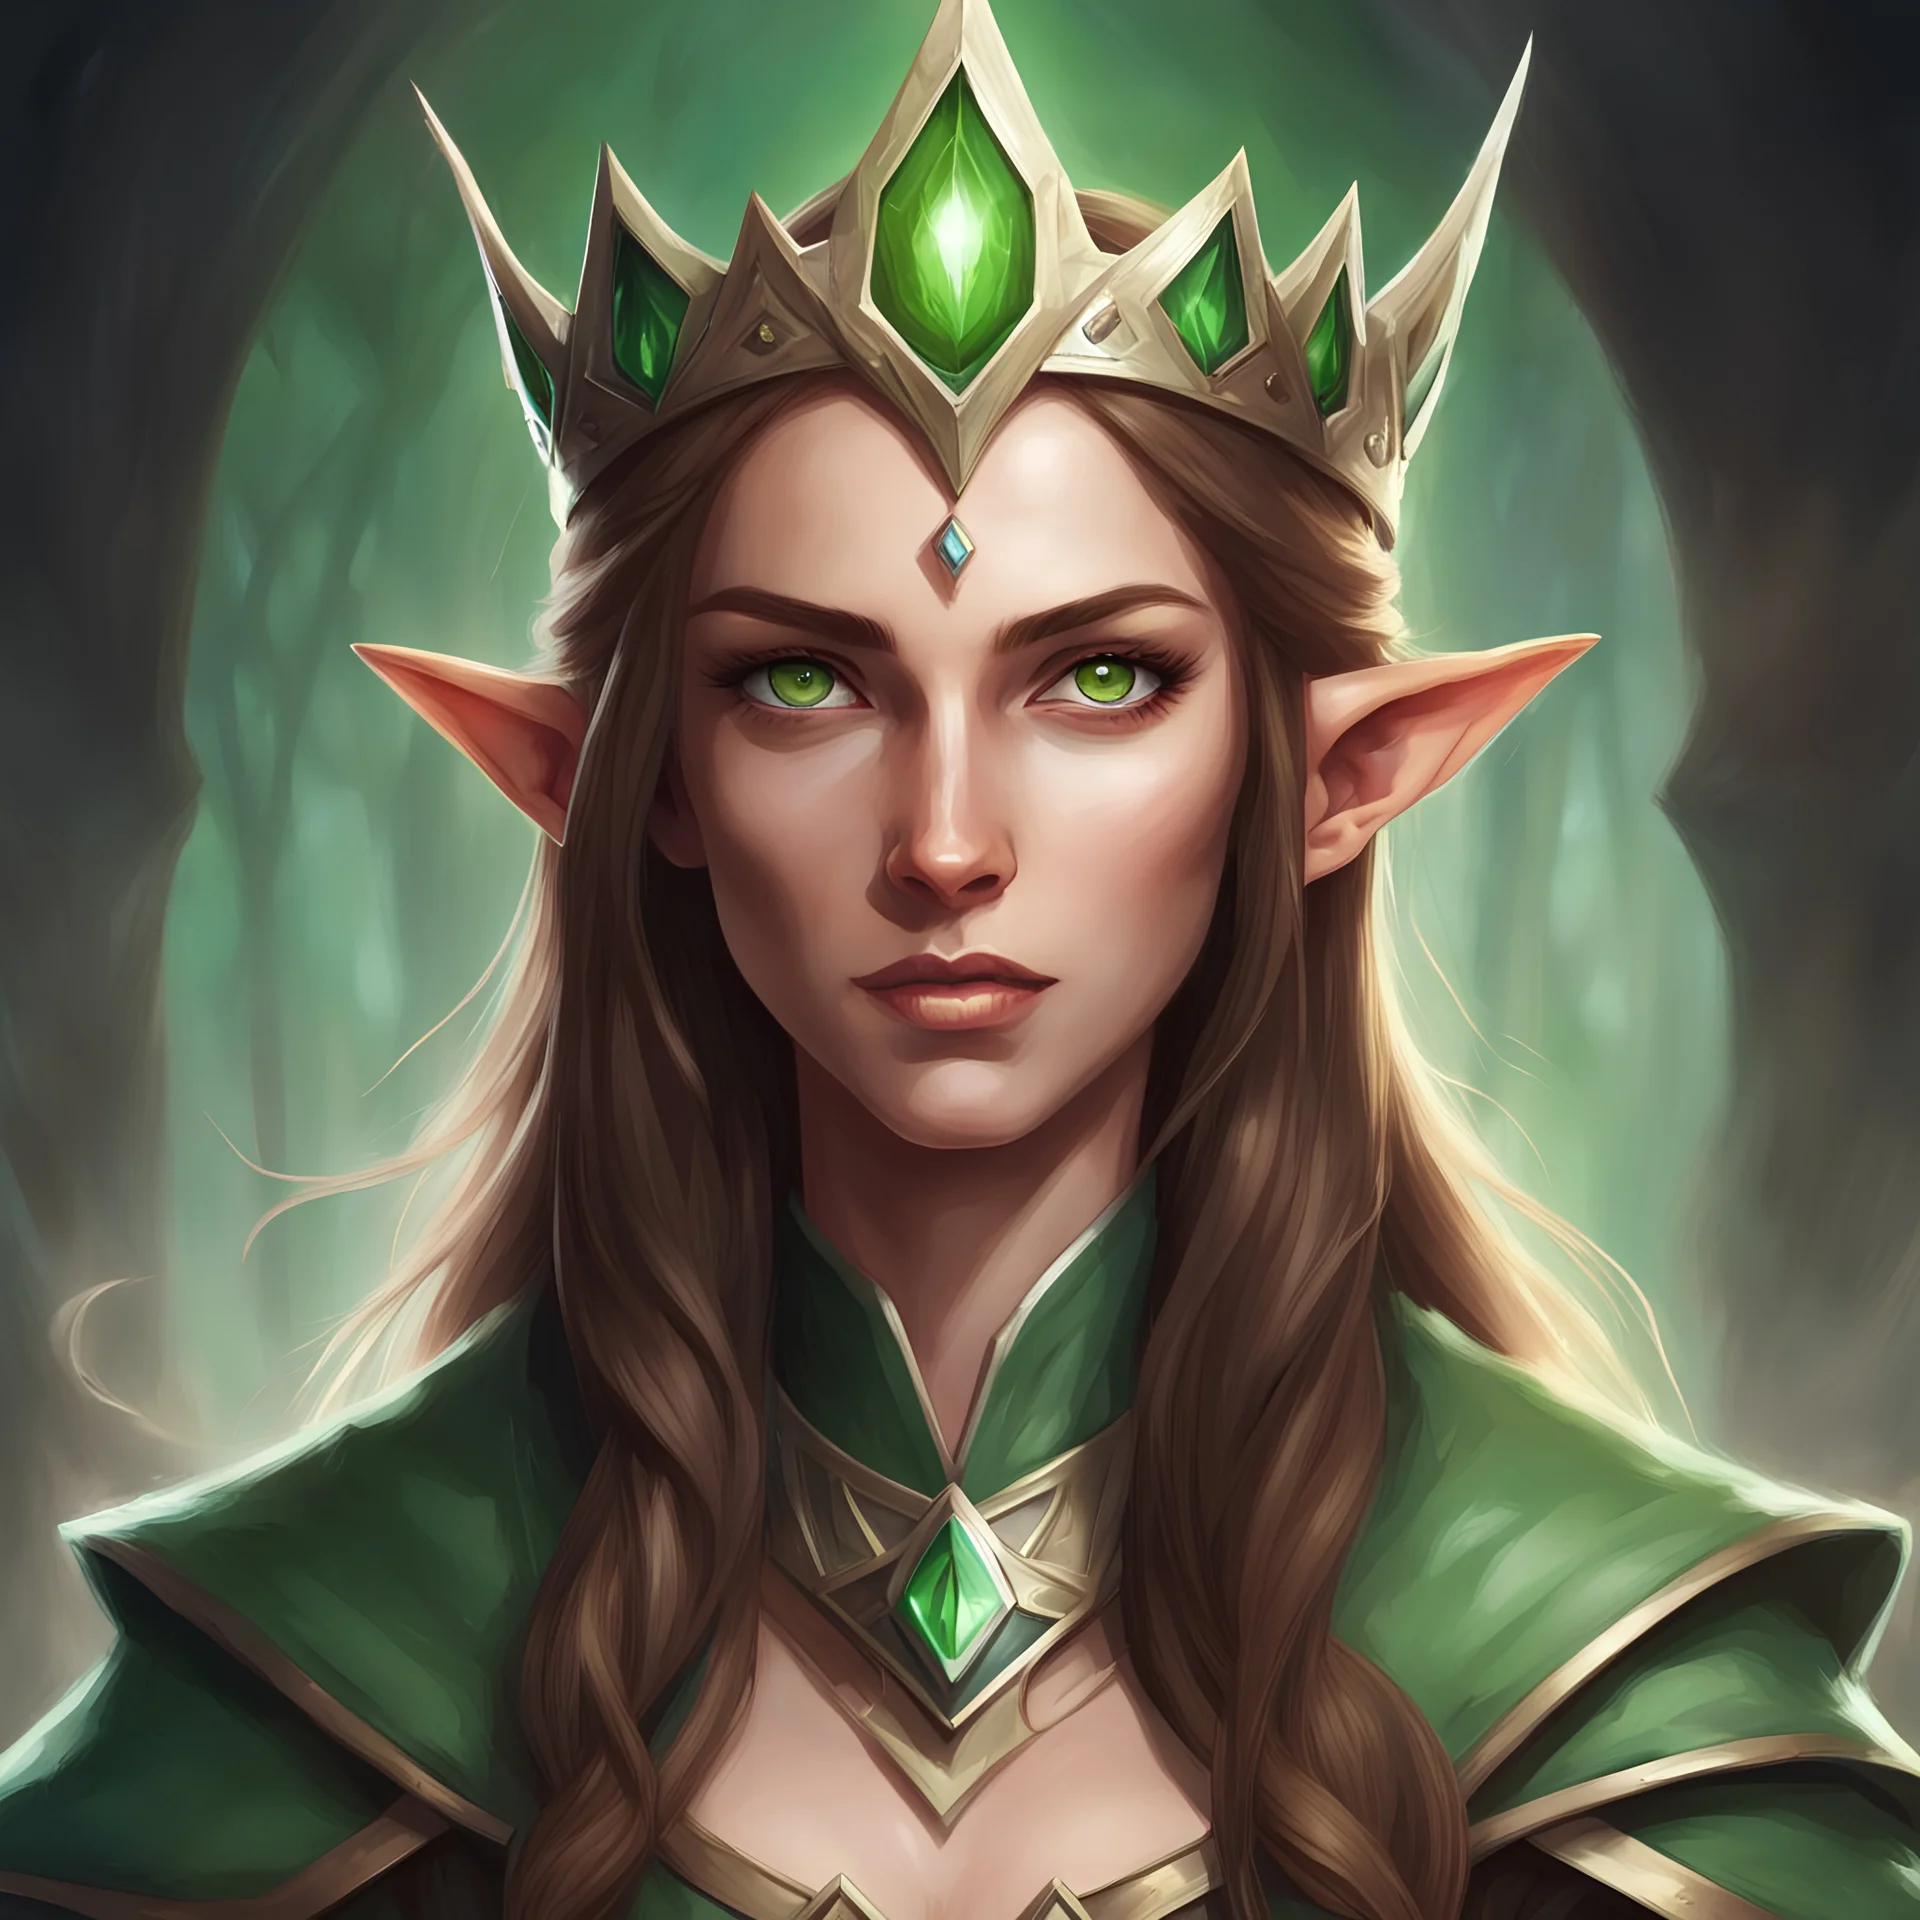 Generate a dungeons and dragons character portrait of a female high elf wizard with brown hair and green eyes. She looks calm. She looks very powerful and dangerous. She wears an elvish crown